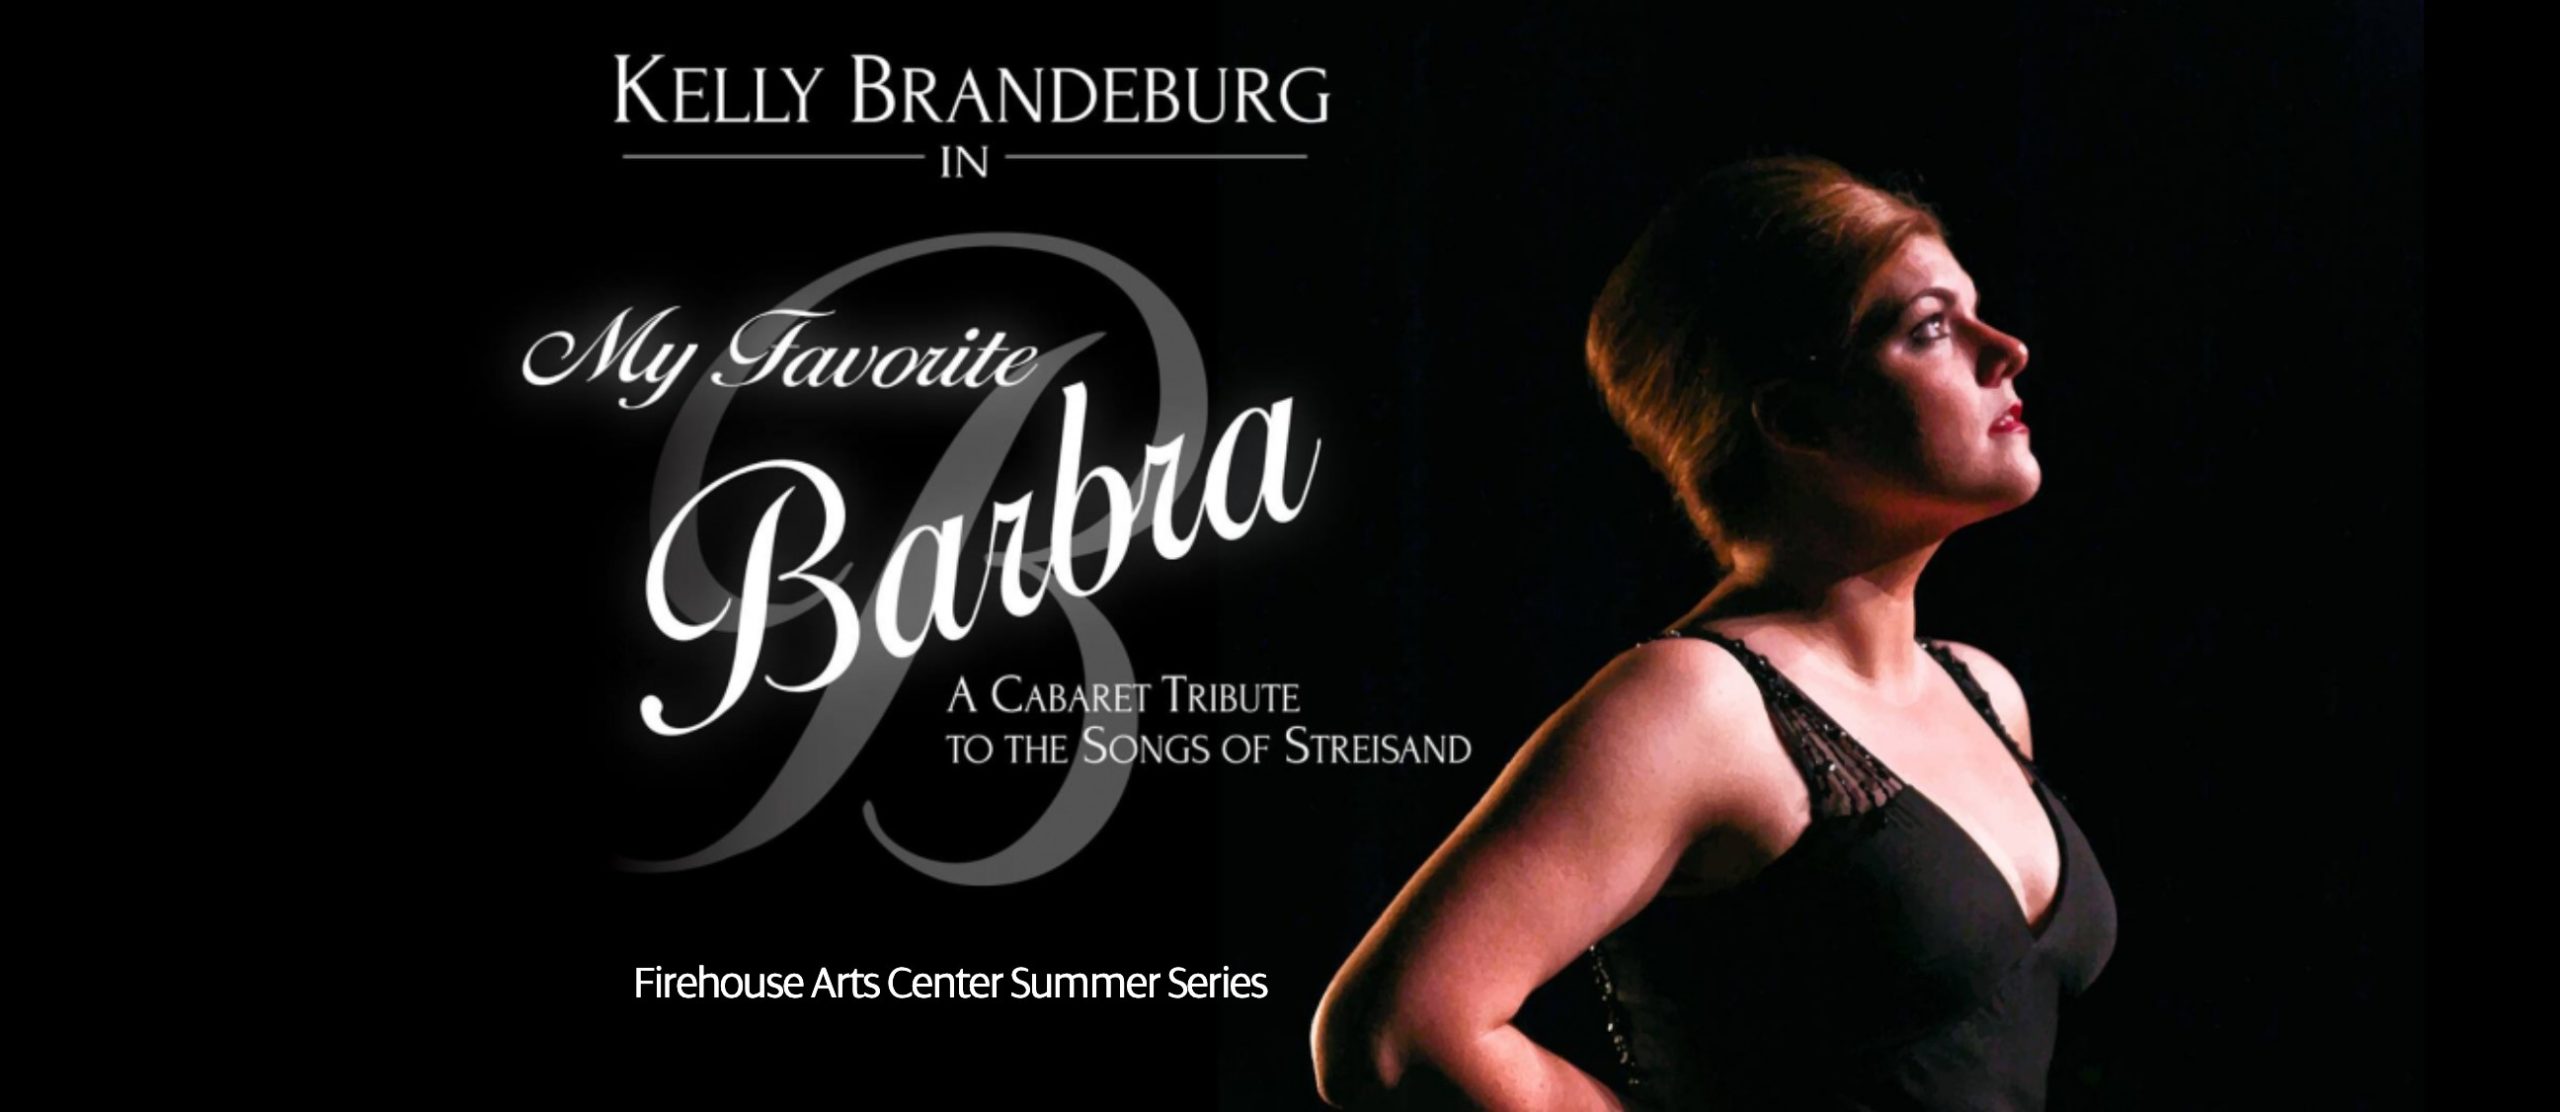 Kelly Brandeburg - A Tribute to The Songs of Barbra Streisand